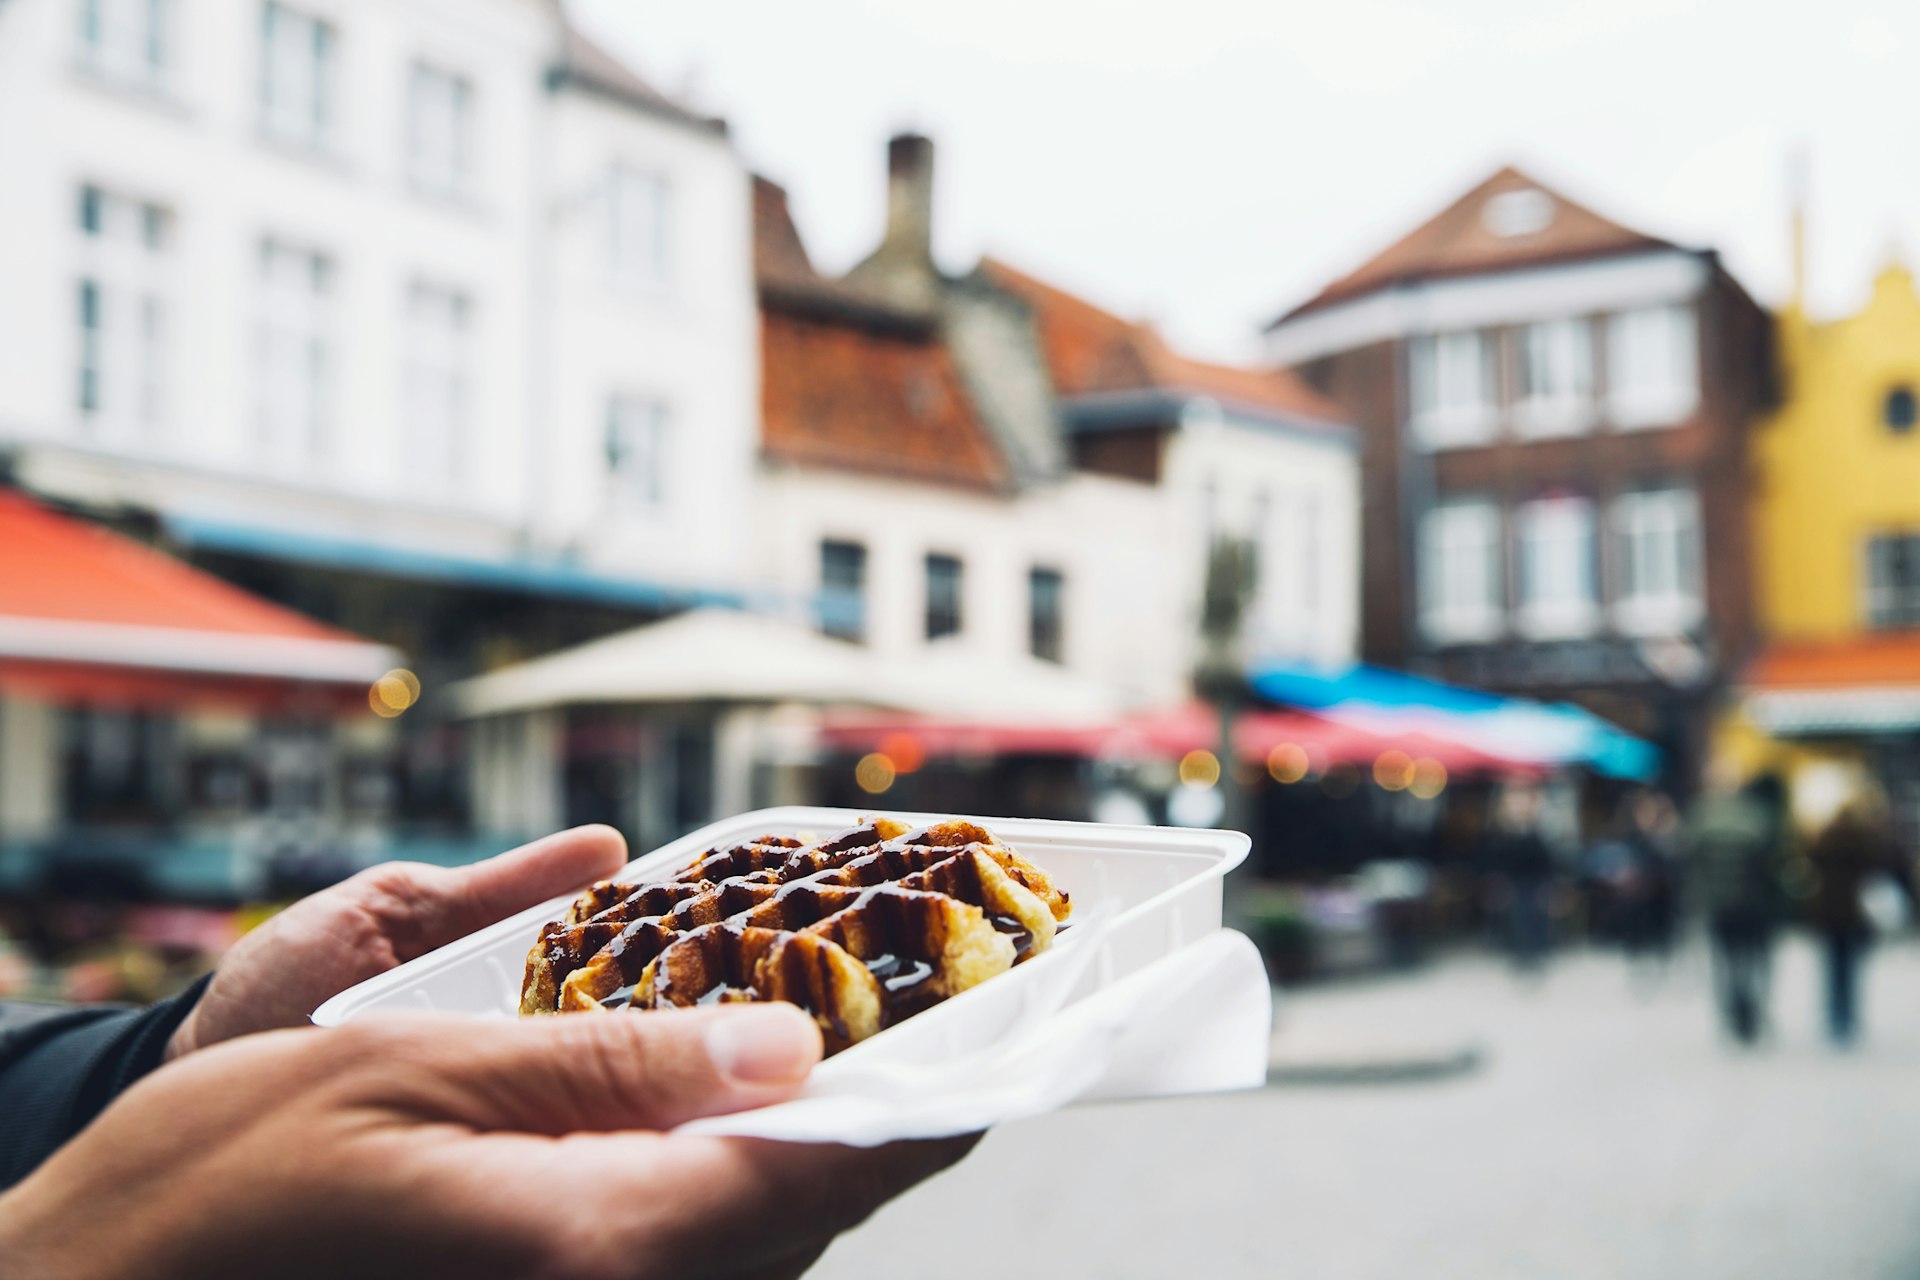 A person holds a takeaway tray containing a waffle covered in chocolate sauce outside in a medieval square. 